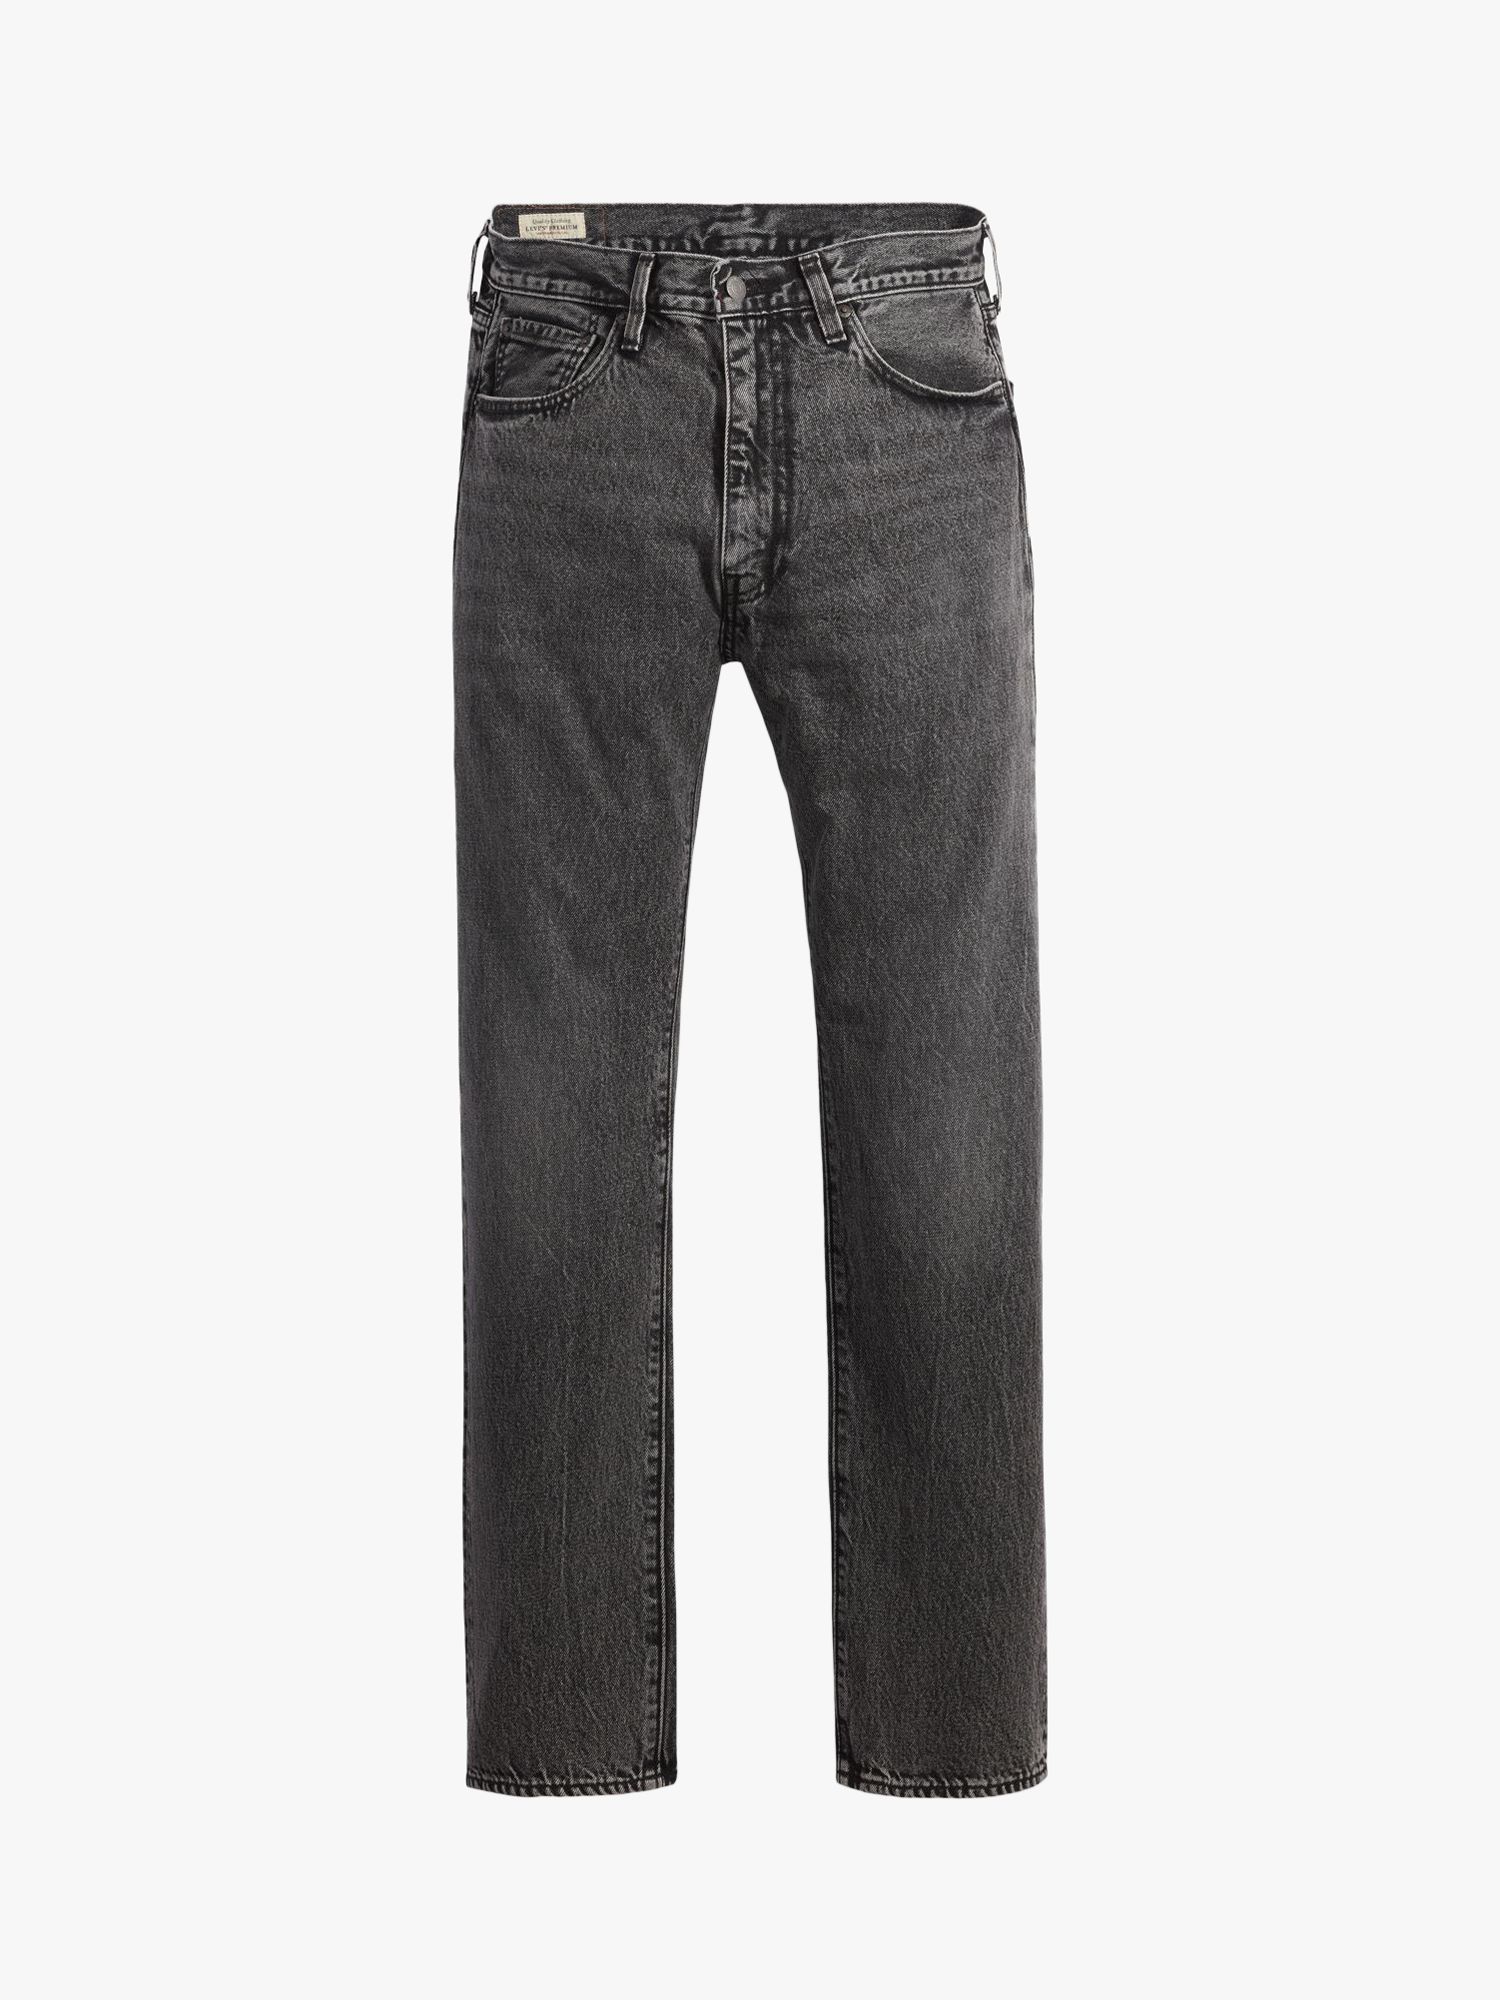 Levi's 551 Straight Fit Jeans, Swim Shad at John Lewis & Partners